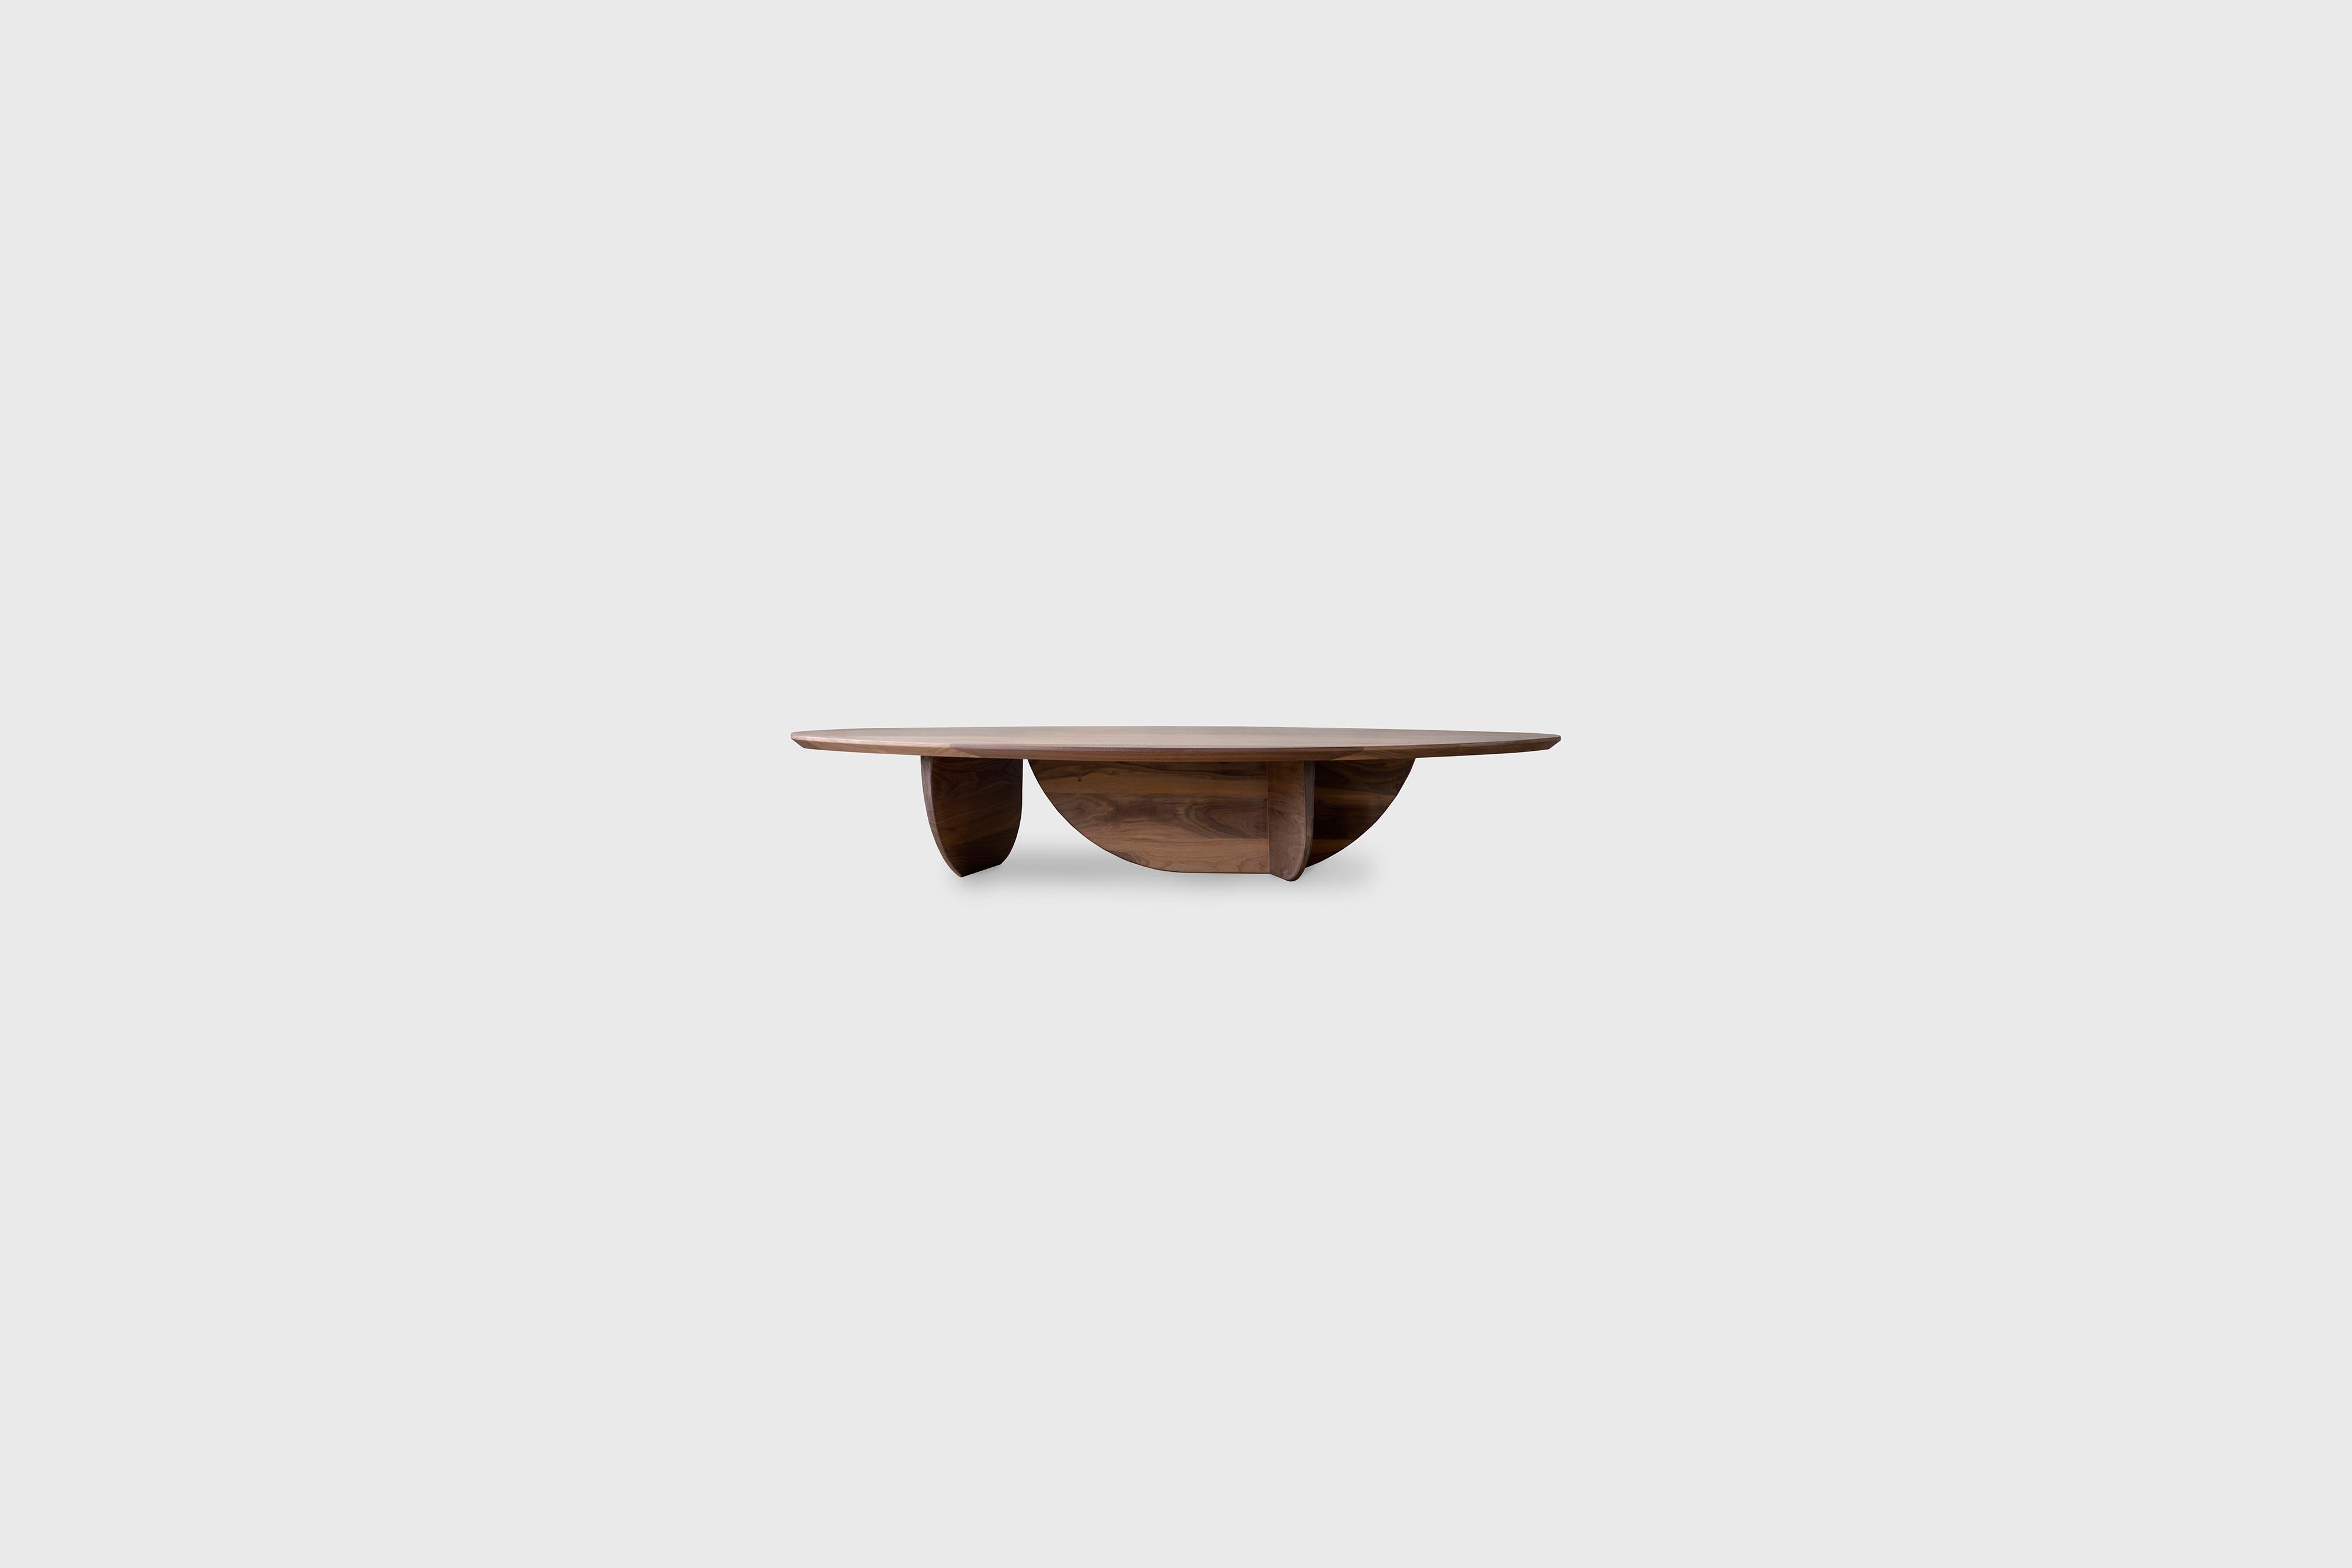 Pebble coffee table II by Atra Design
Dimensions: D 174 x W 77.7 x H 32.2 cm
Materials: Walnut wood.
Also available in other woods; white oiled oak, teak, and charcoal oak. 

Atra Design
We are Atra, a furniture brand produced by Atra form a mexico